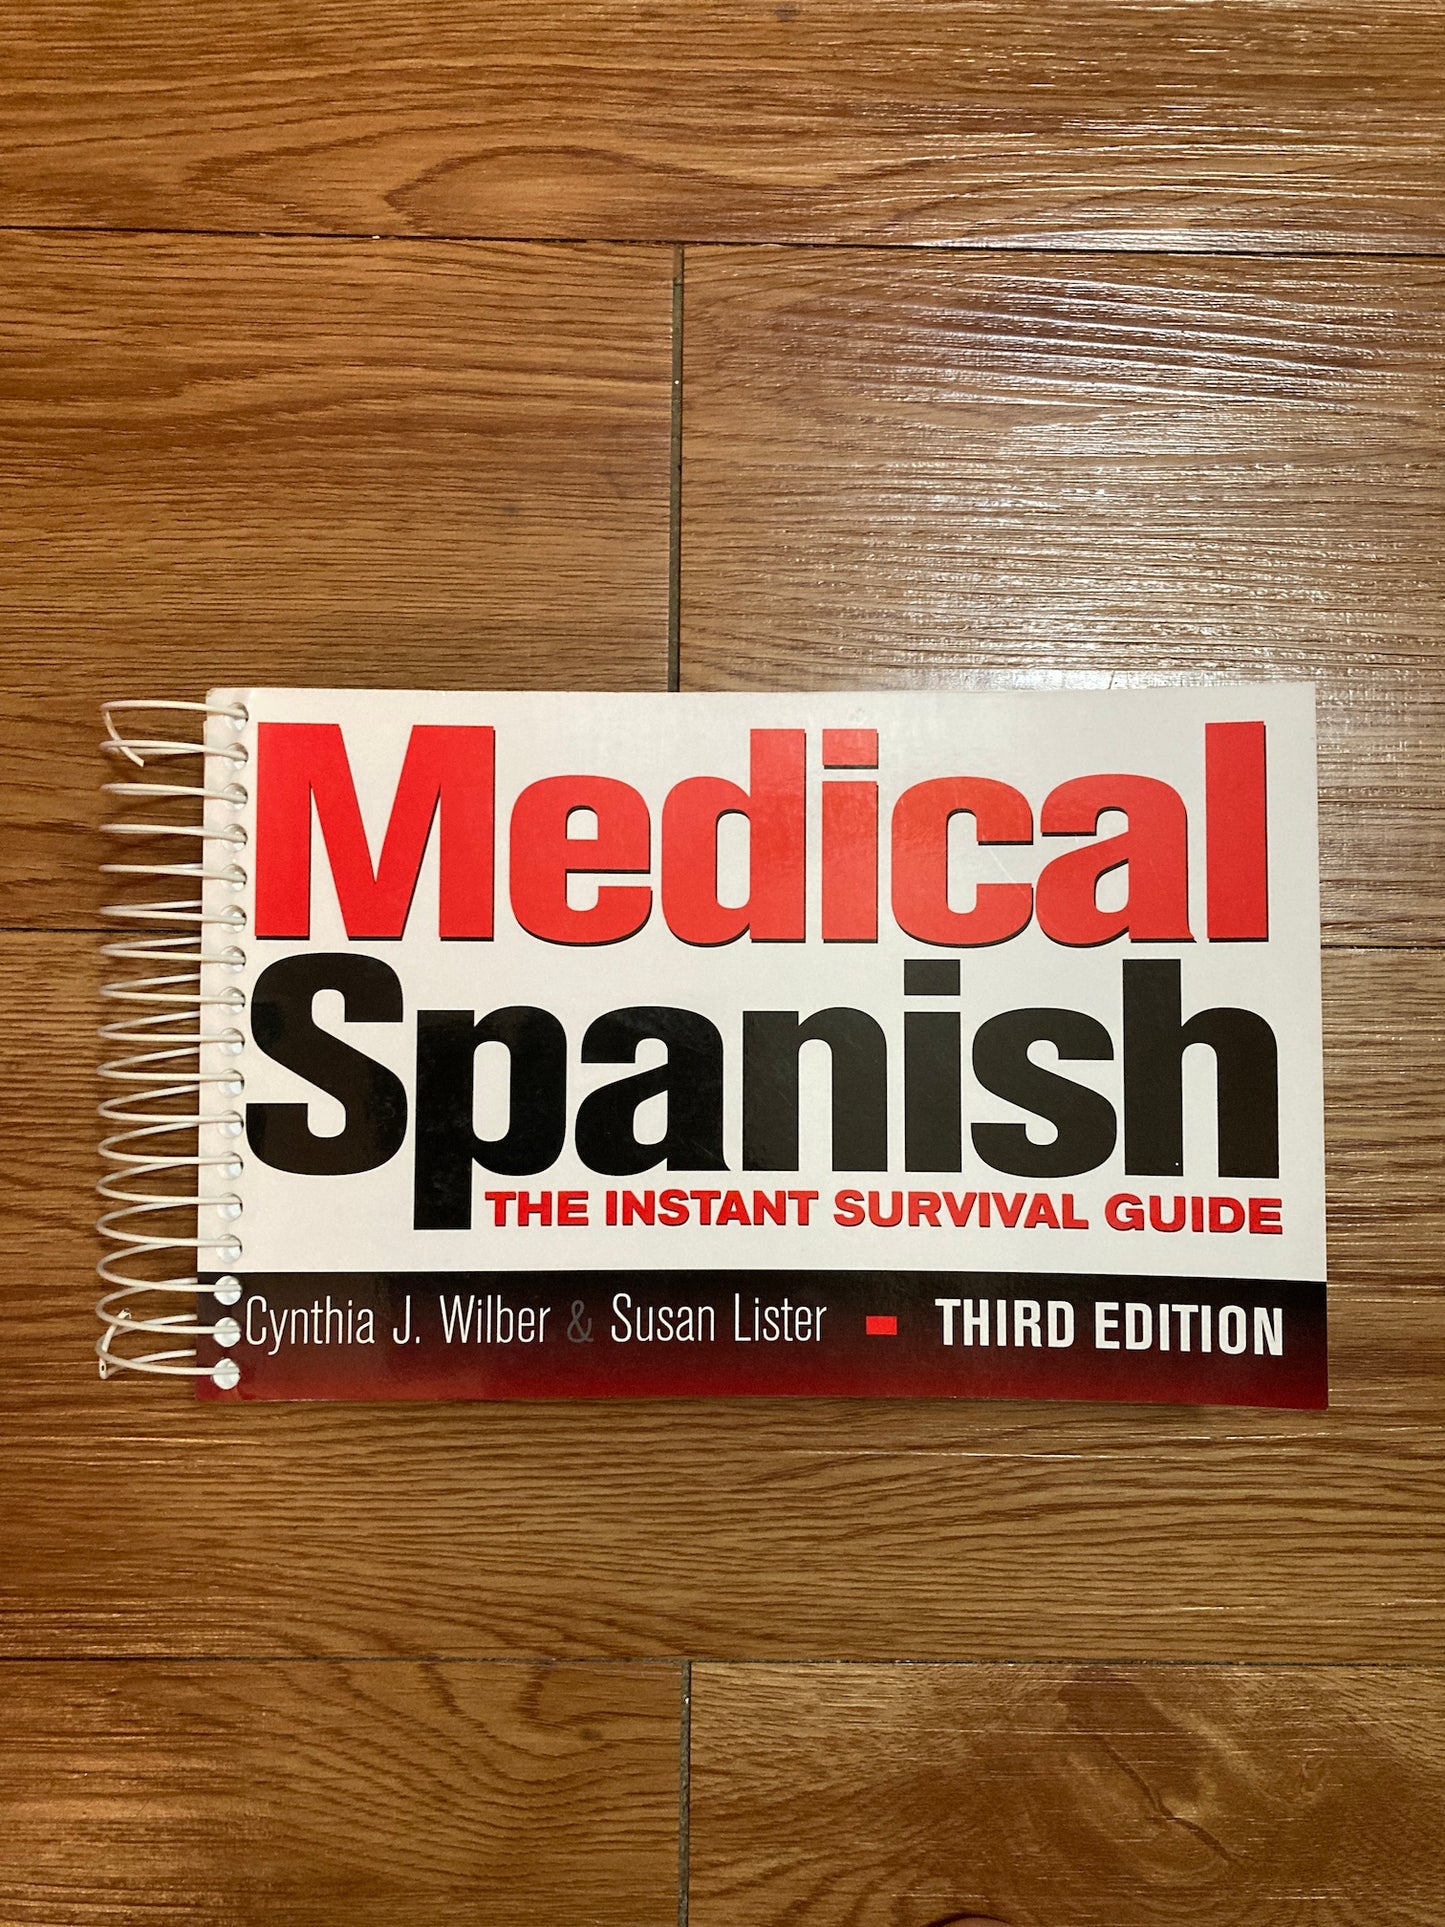 Medical Spanish: The Instant Survival Guide (3rd Edition)